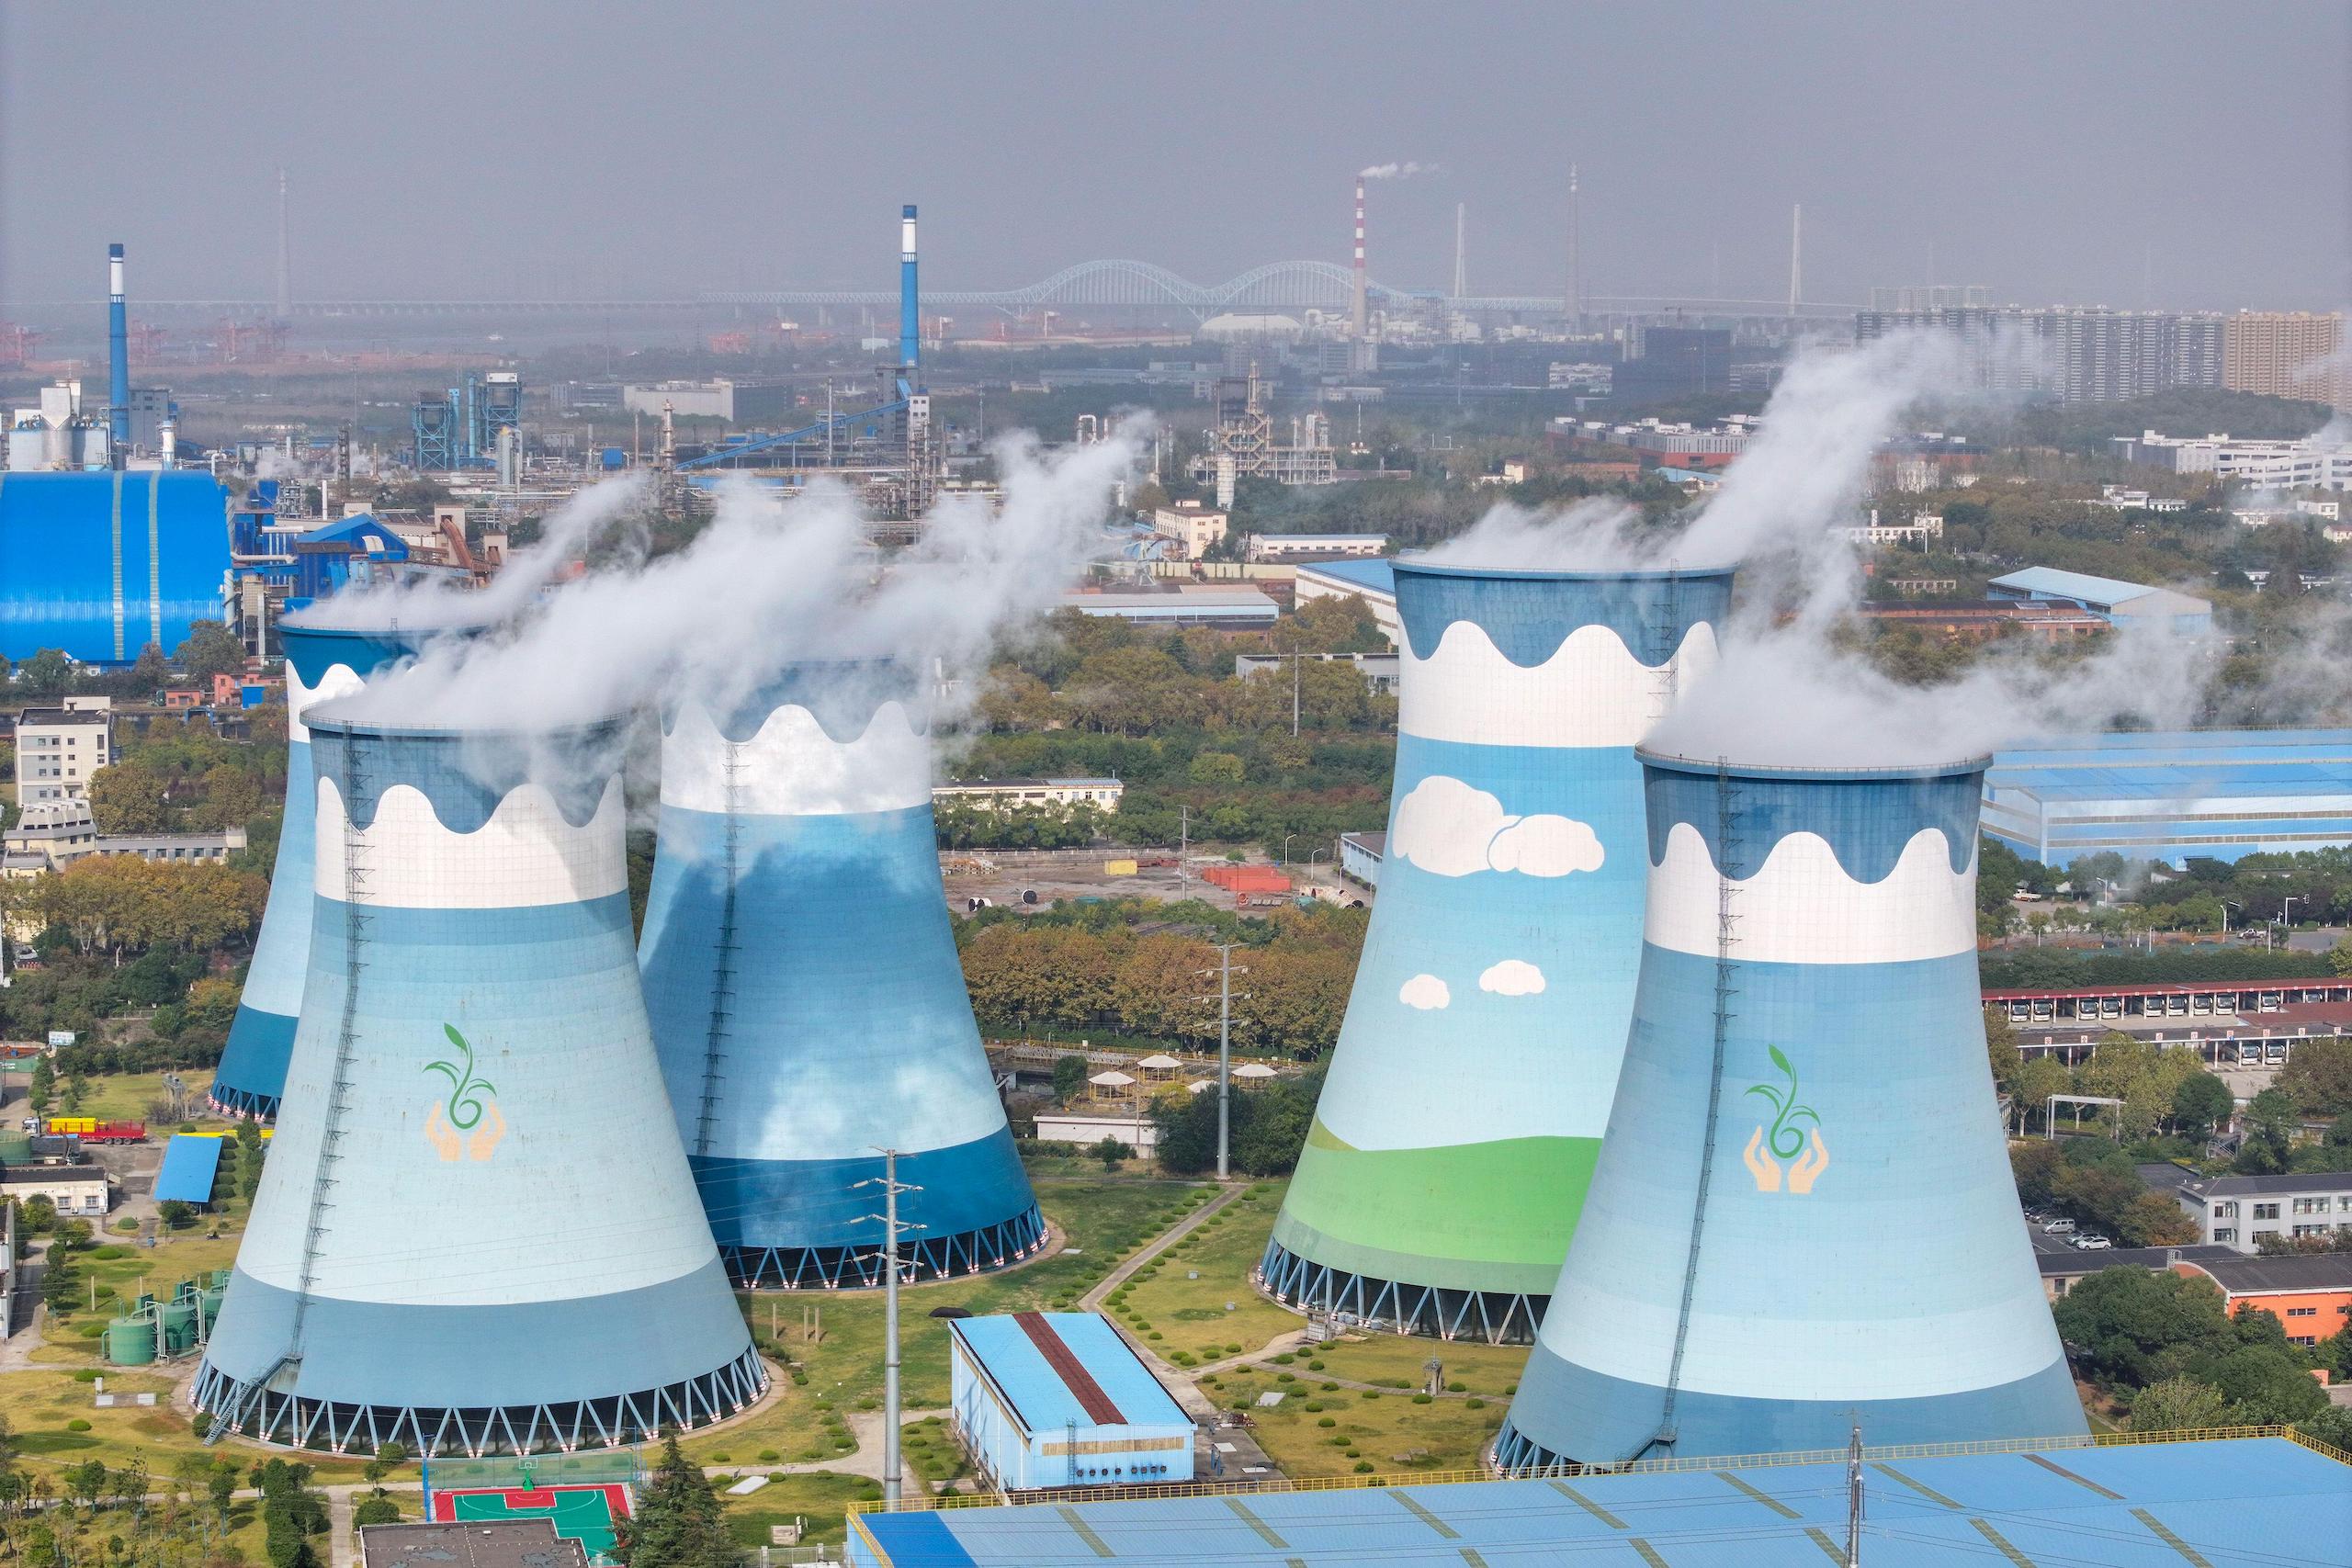 <p>A coal-fired power station connected to the Meishan Iron and Steel plant in Nanjing, Jiangsu province (Image: Alamy)</p>